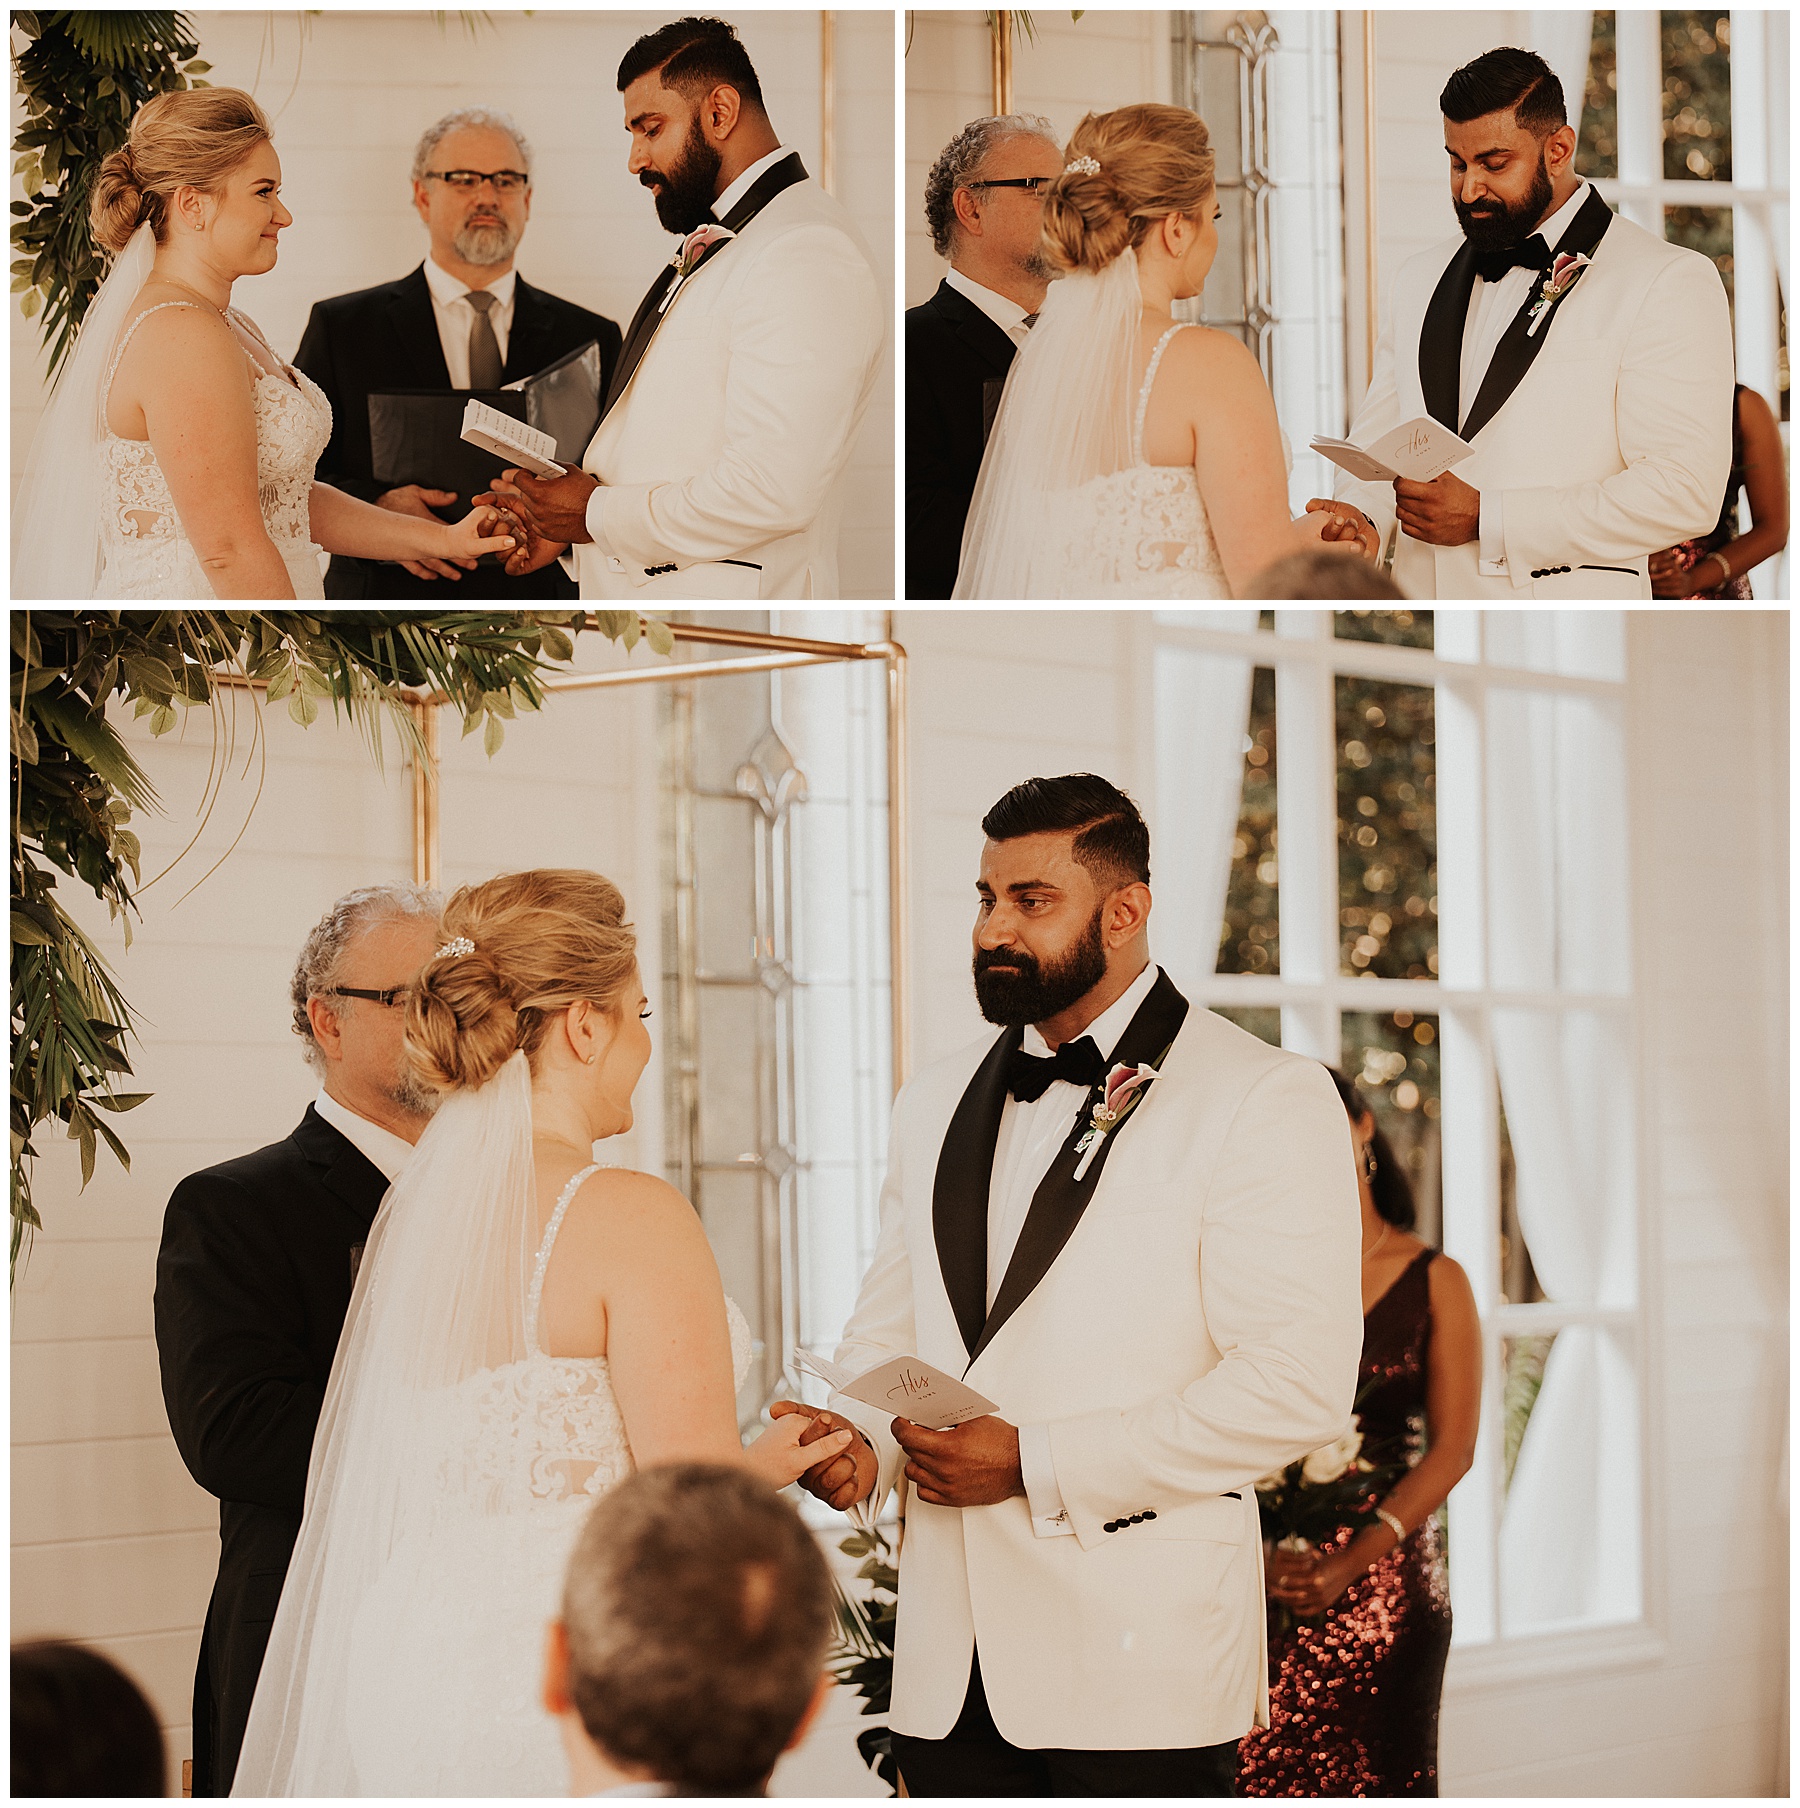 Multi cultural wedding ceremony at Cross Creek Ranch, in Dover Florida - Photographed by Juju Photography - Destination wedding photographer